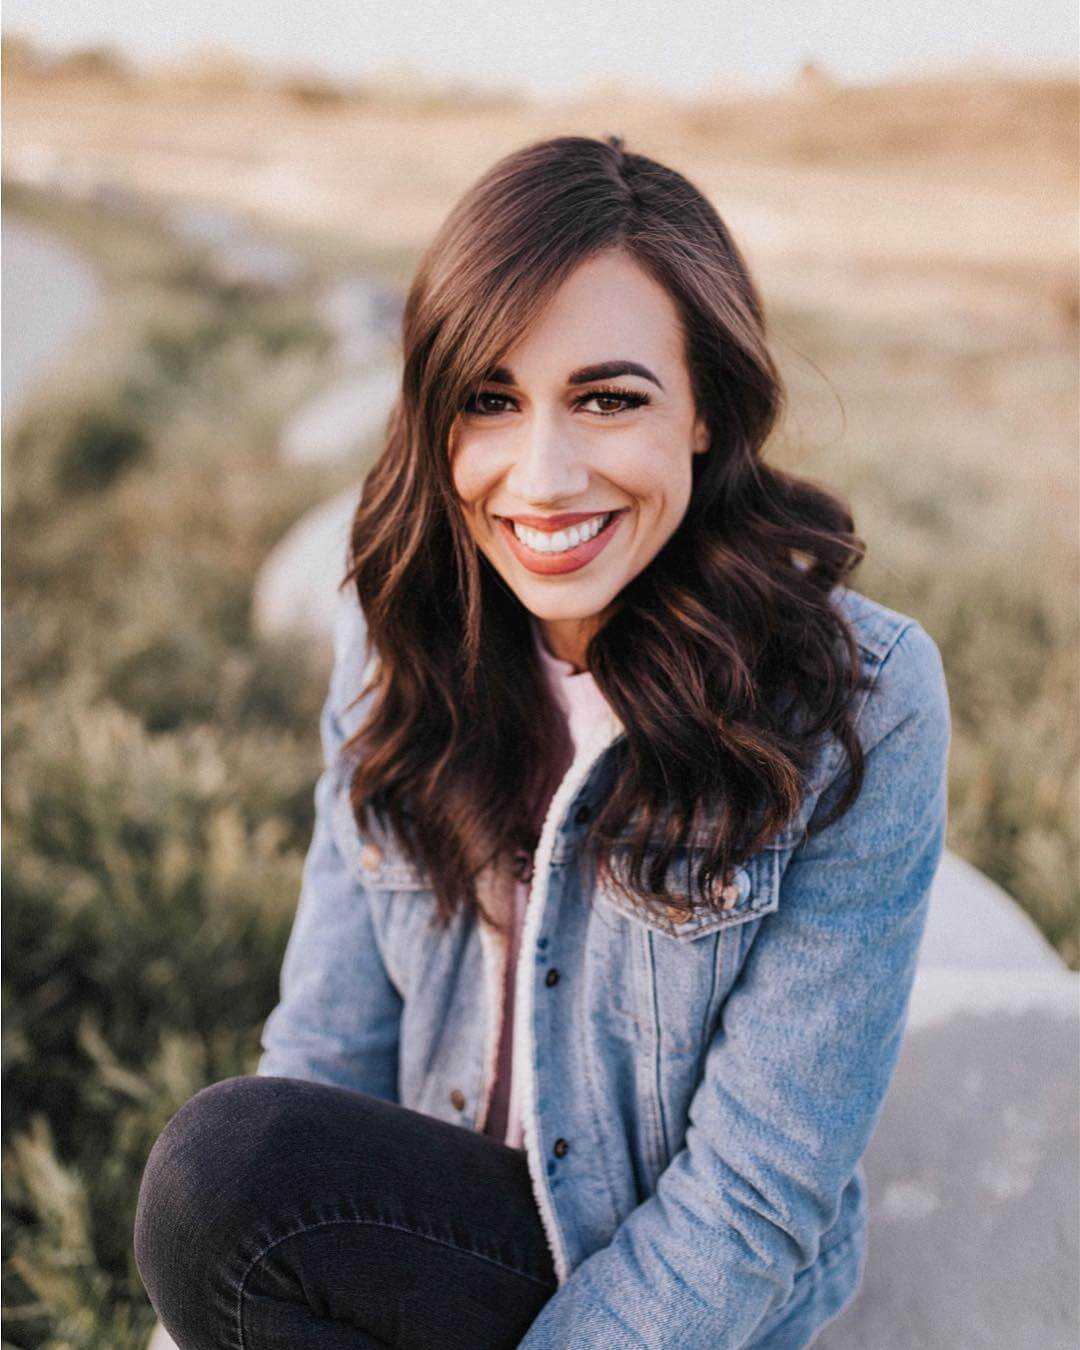 51 Hottest Colleen Ballinger Big Butt Pictures That Will Make You Begin To Look All Starry Eyed At Her 26